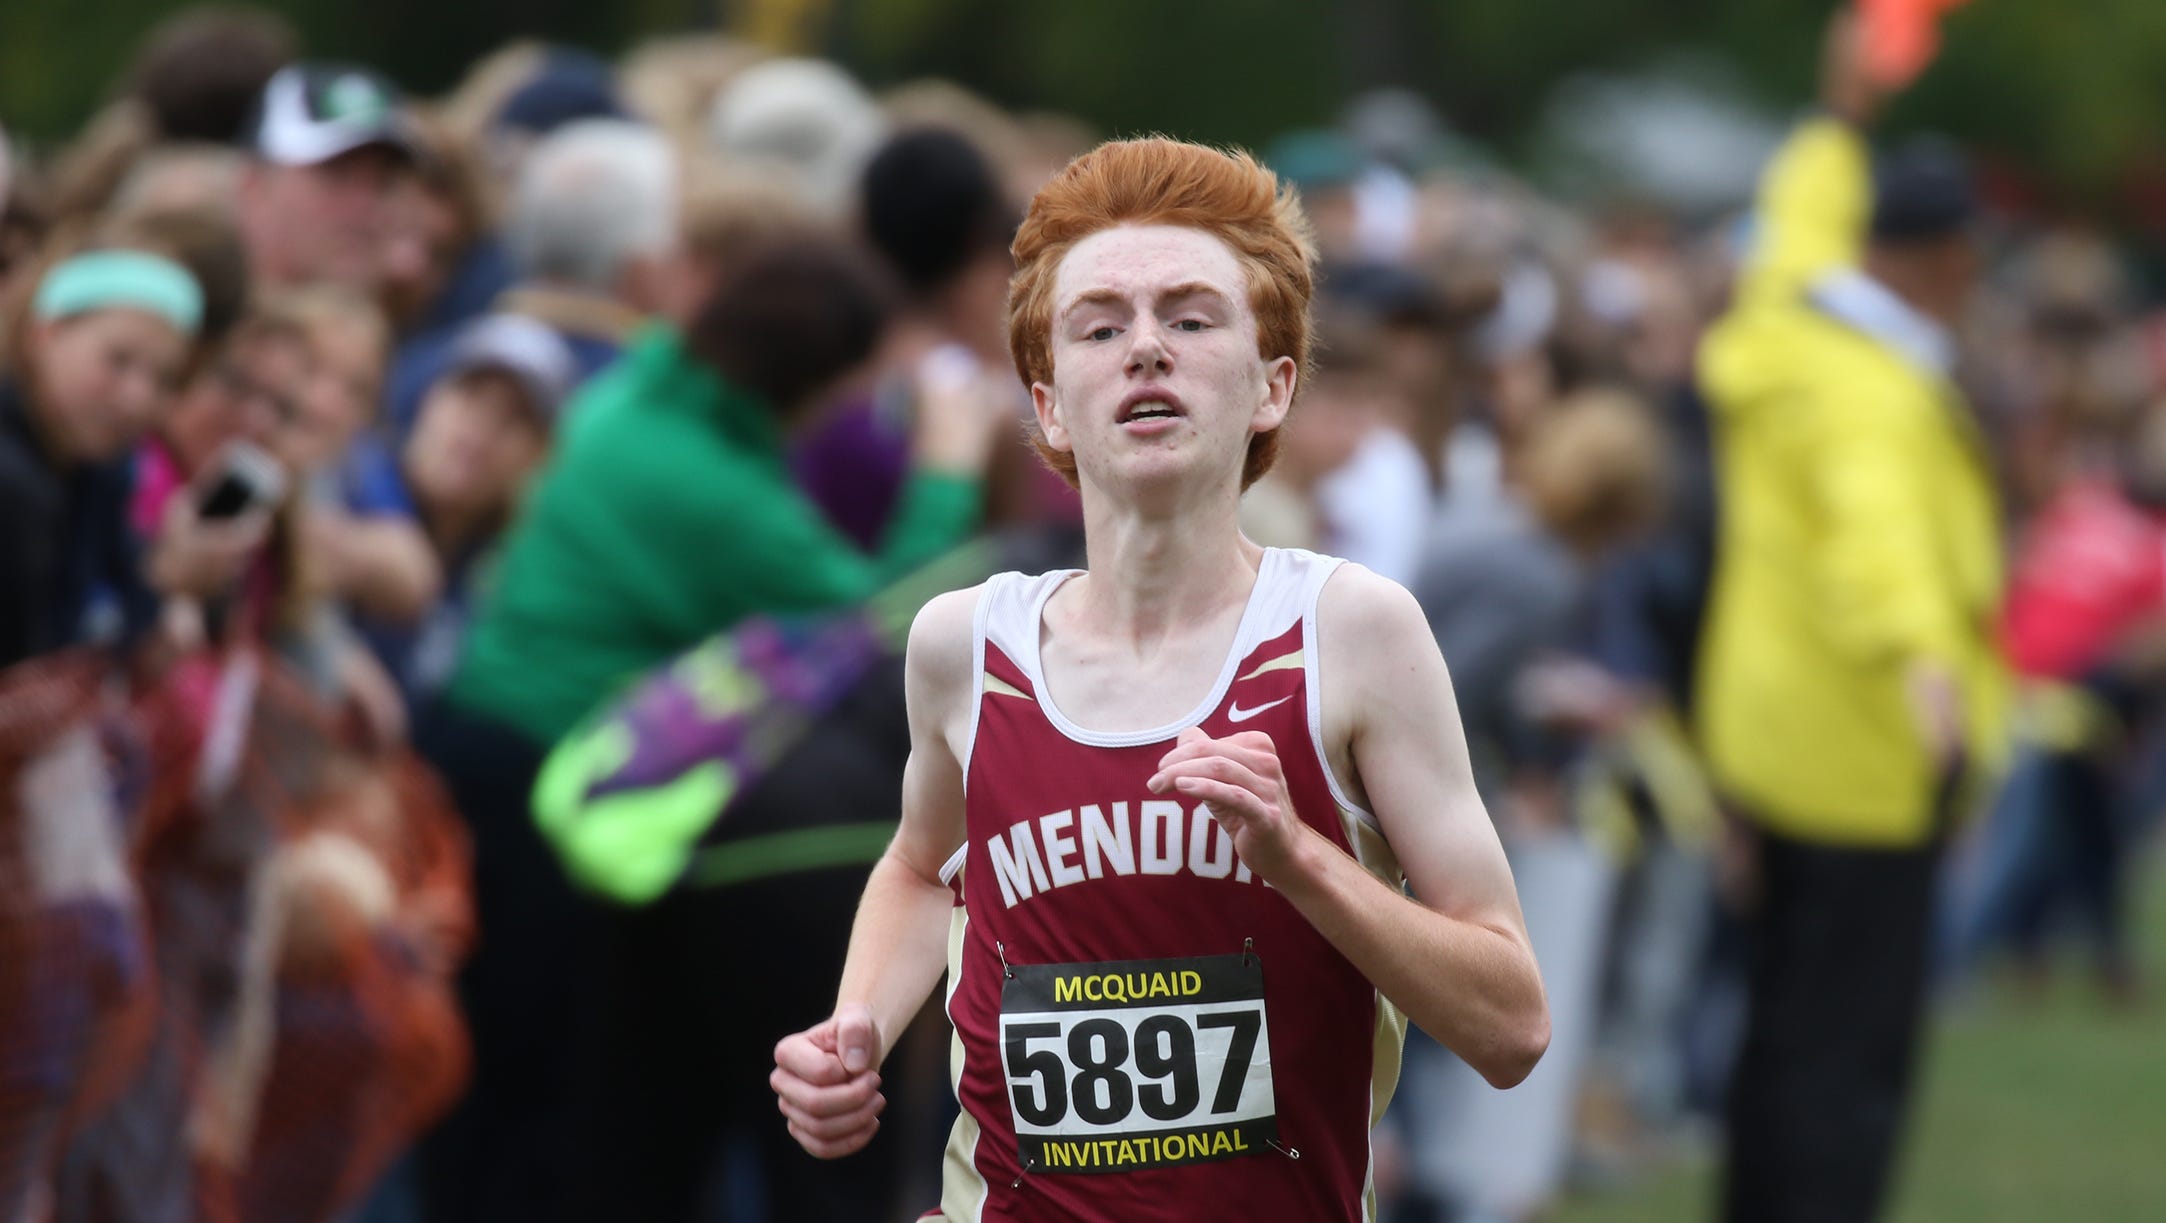 McQuaid Invitational cross country meet to feature record participation